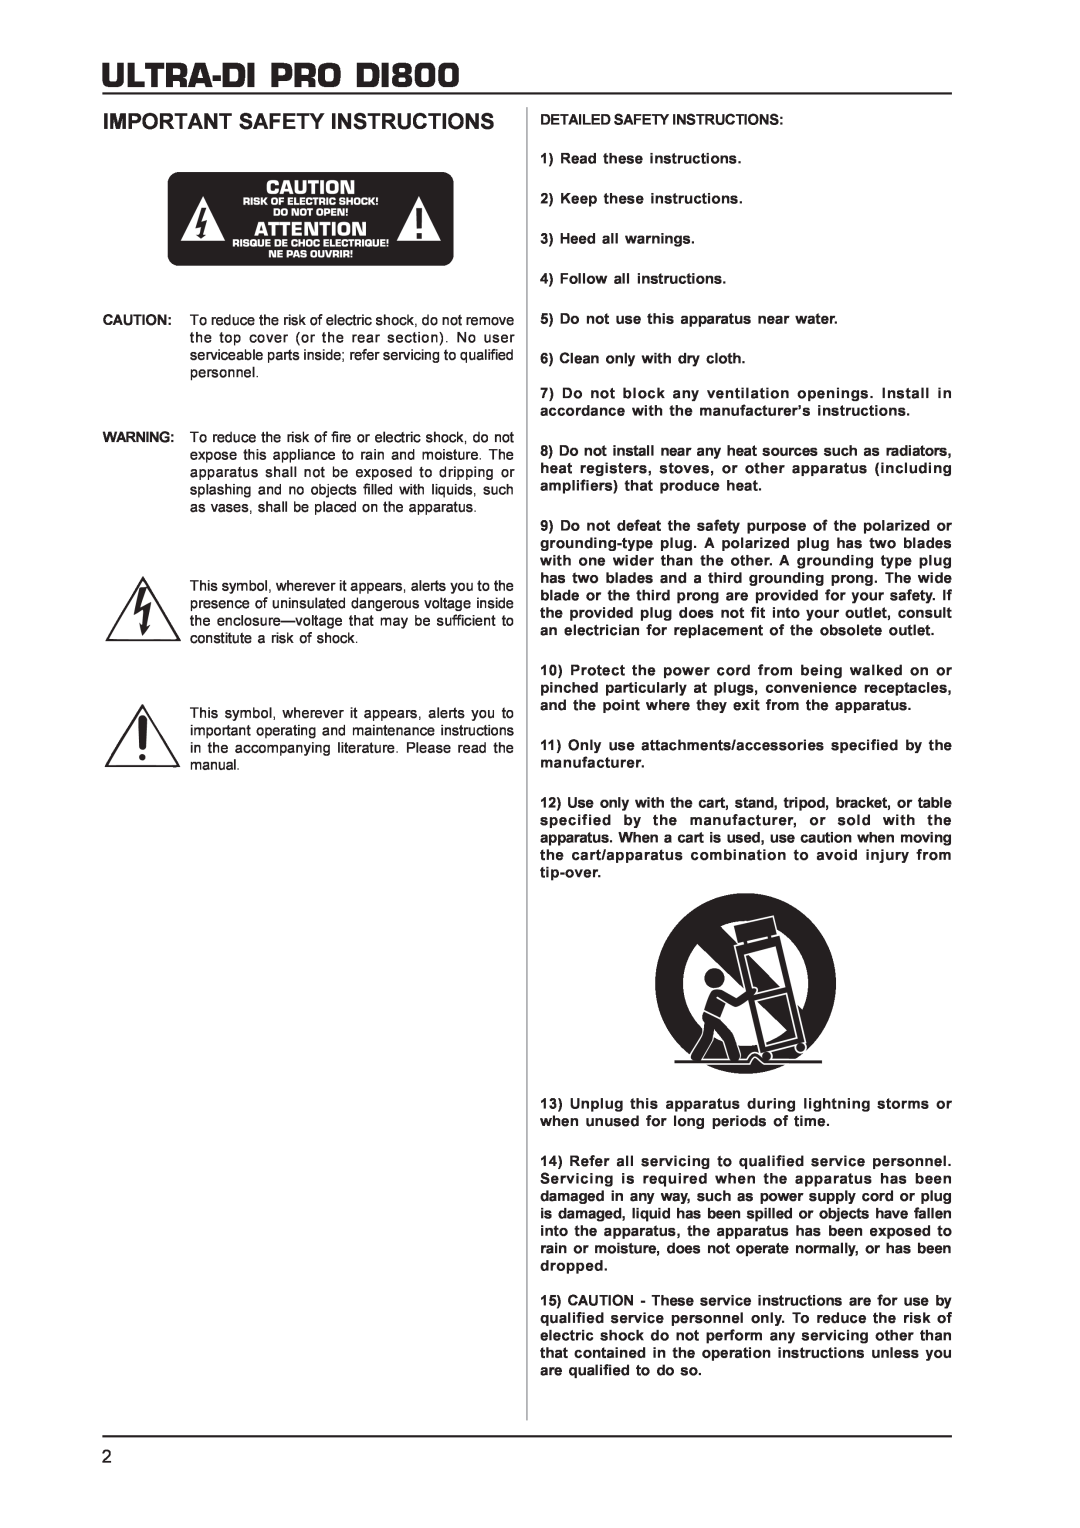 Behringer Ultra-Di Pro (8-channel Direct Injection box) manual ULTRA-DIPRO DI800, Important Safety Instructions 